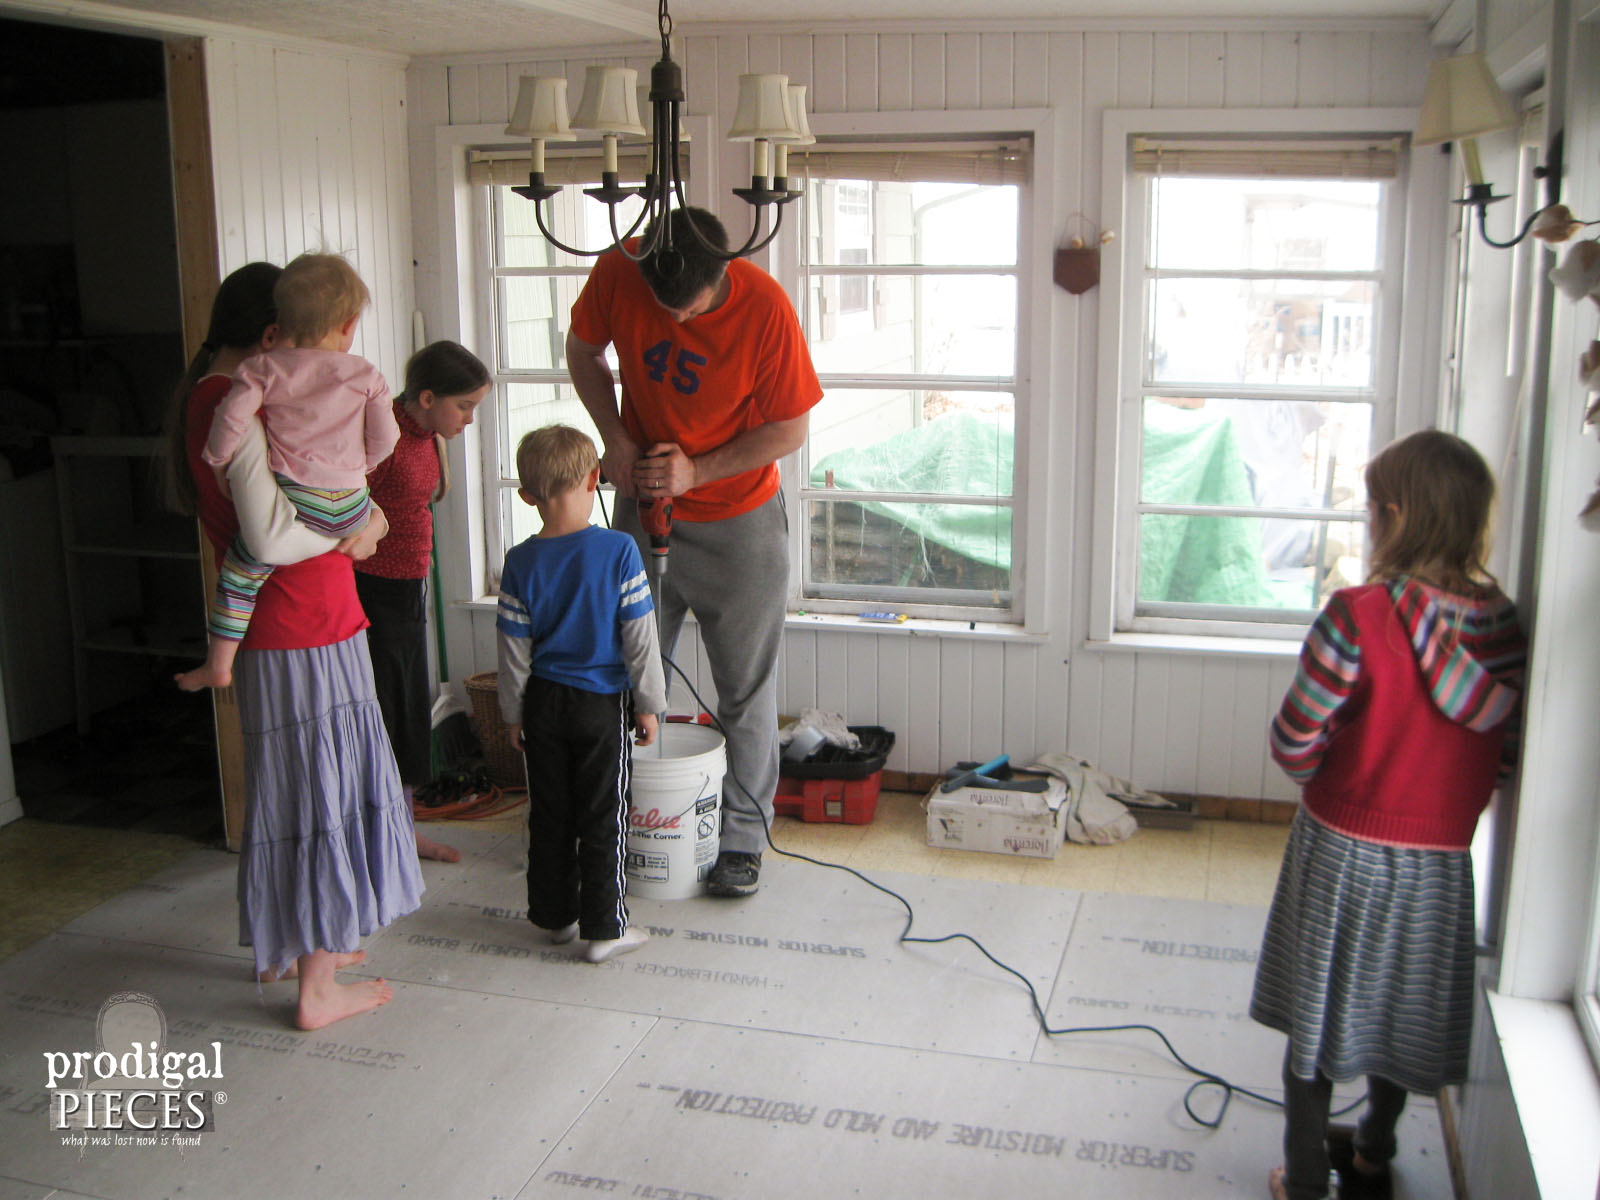 Kids Watching While Dad Mixes Mortar for Tile Floor | Prodigal Pieces | www.prodigalpieces.com